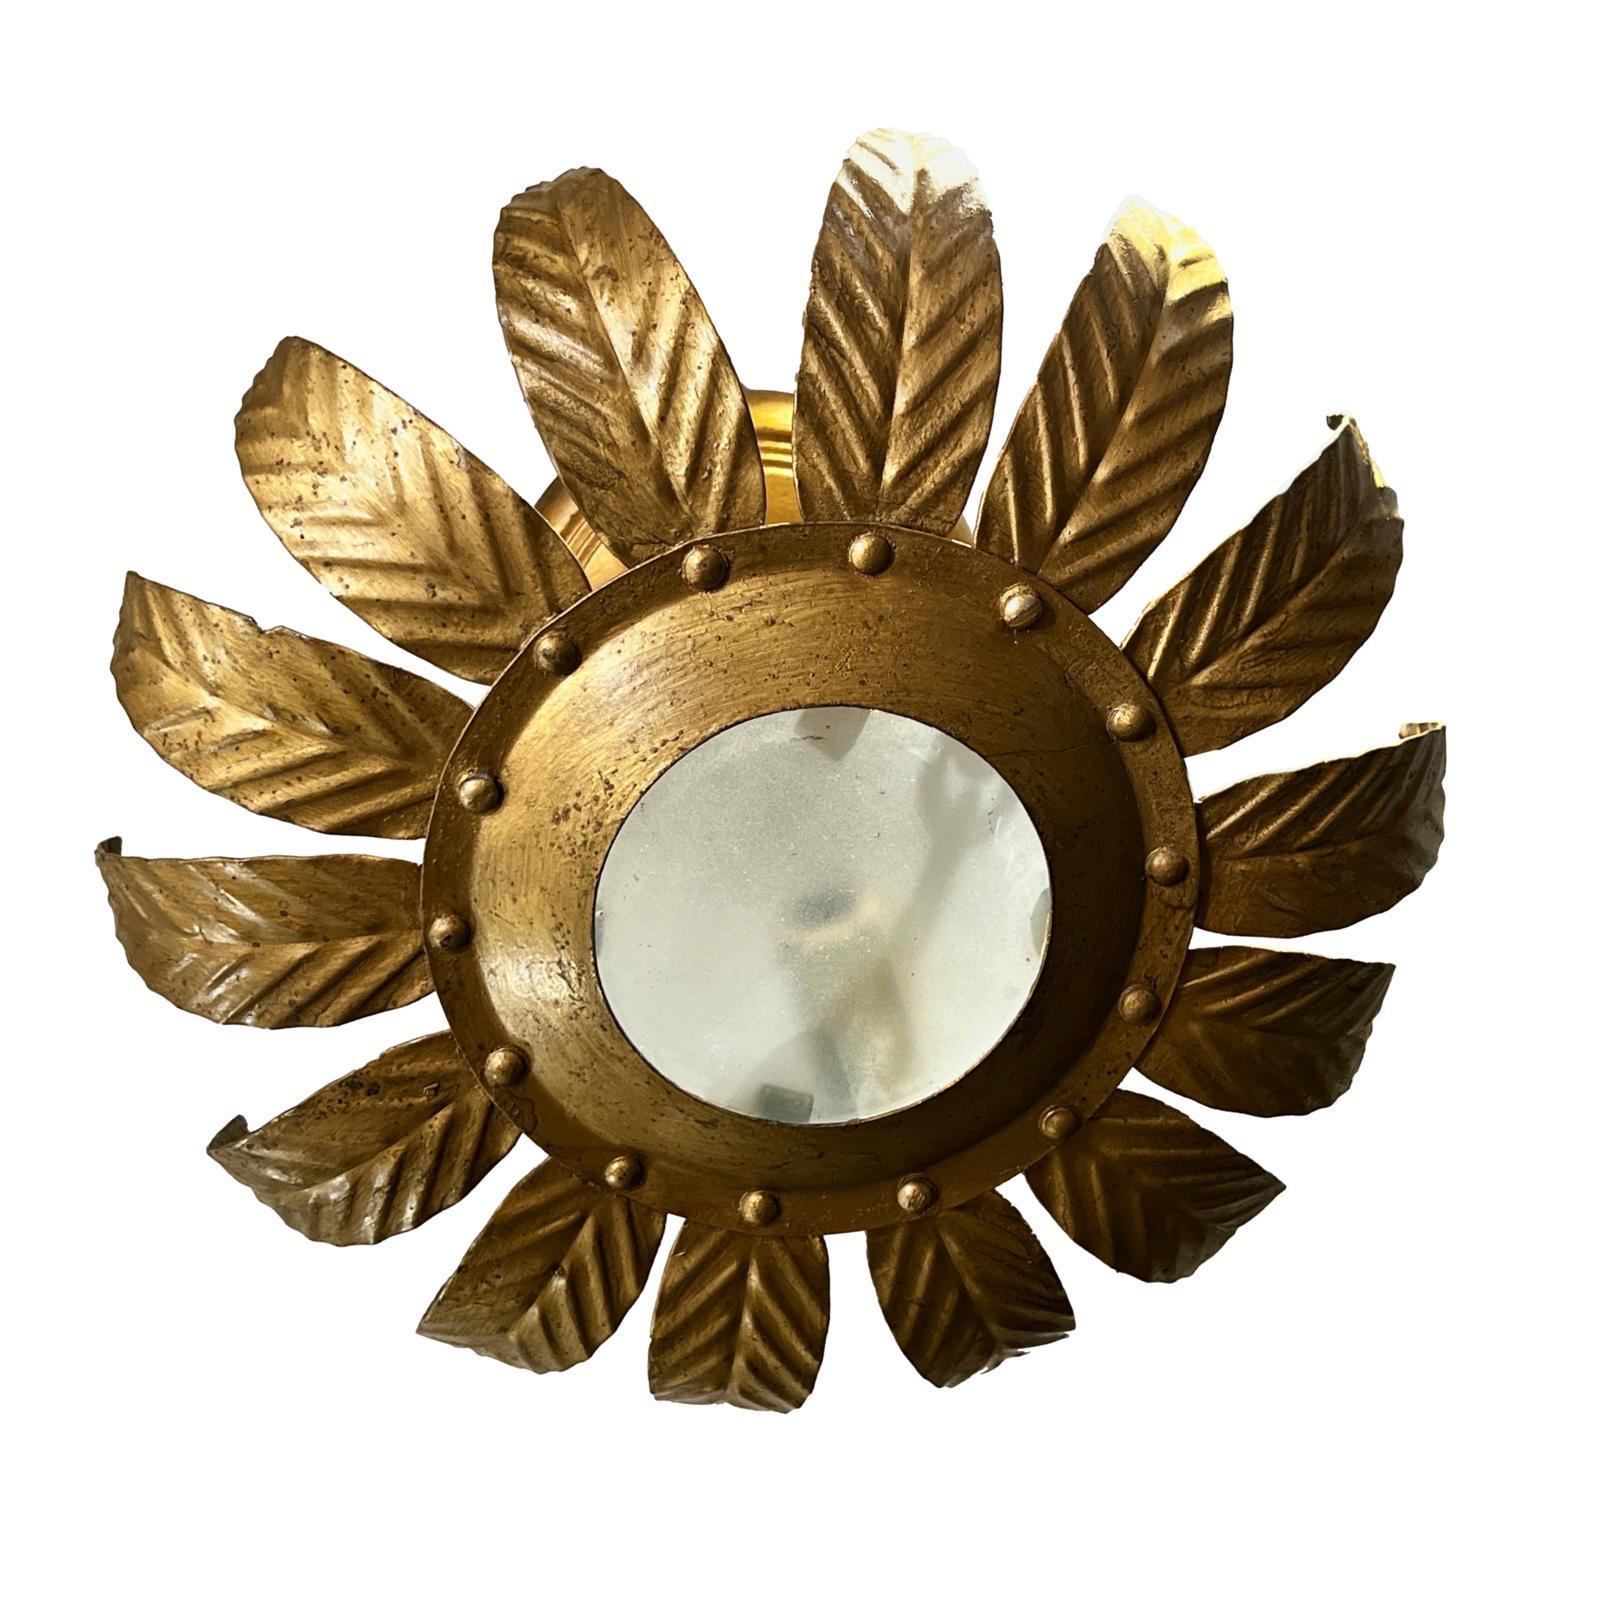 A circa 1930's French sunburst fixture with glass inset.

Measurements:
Height (drop:) 7